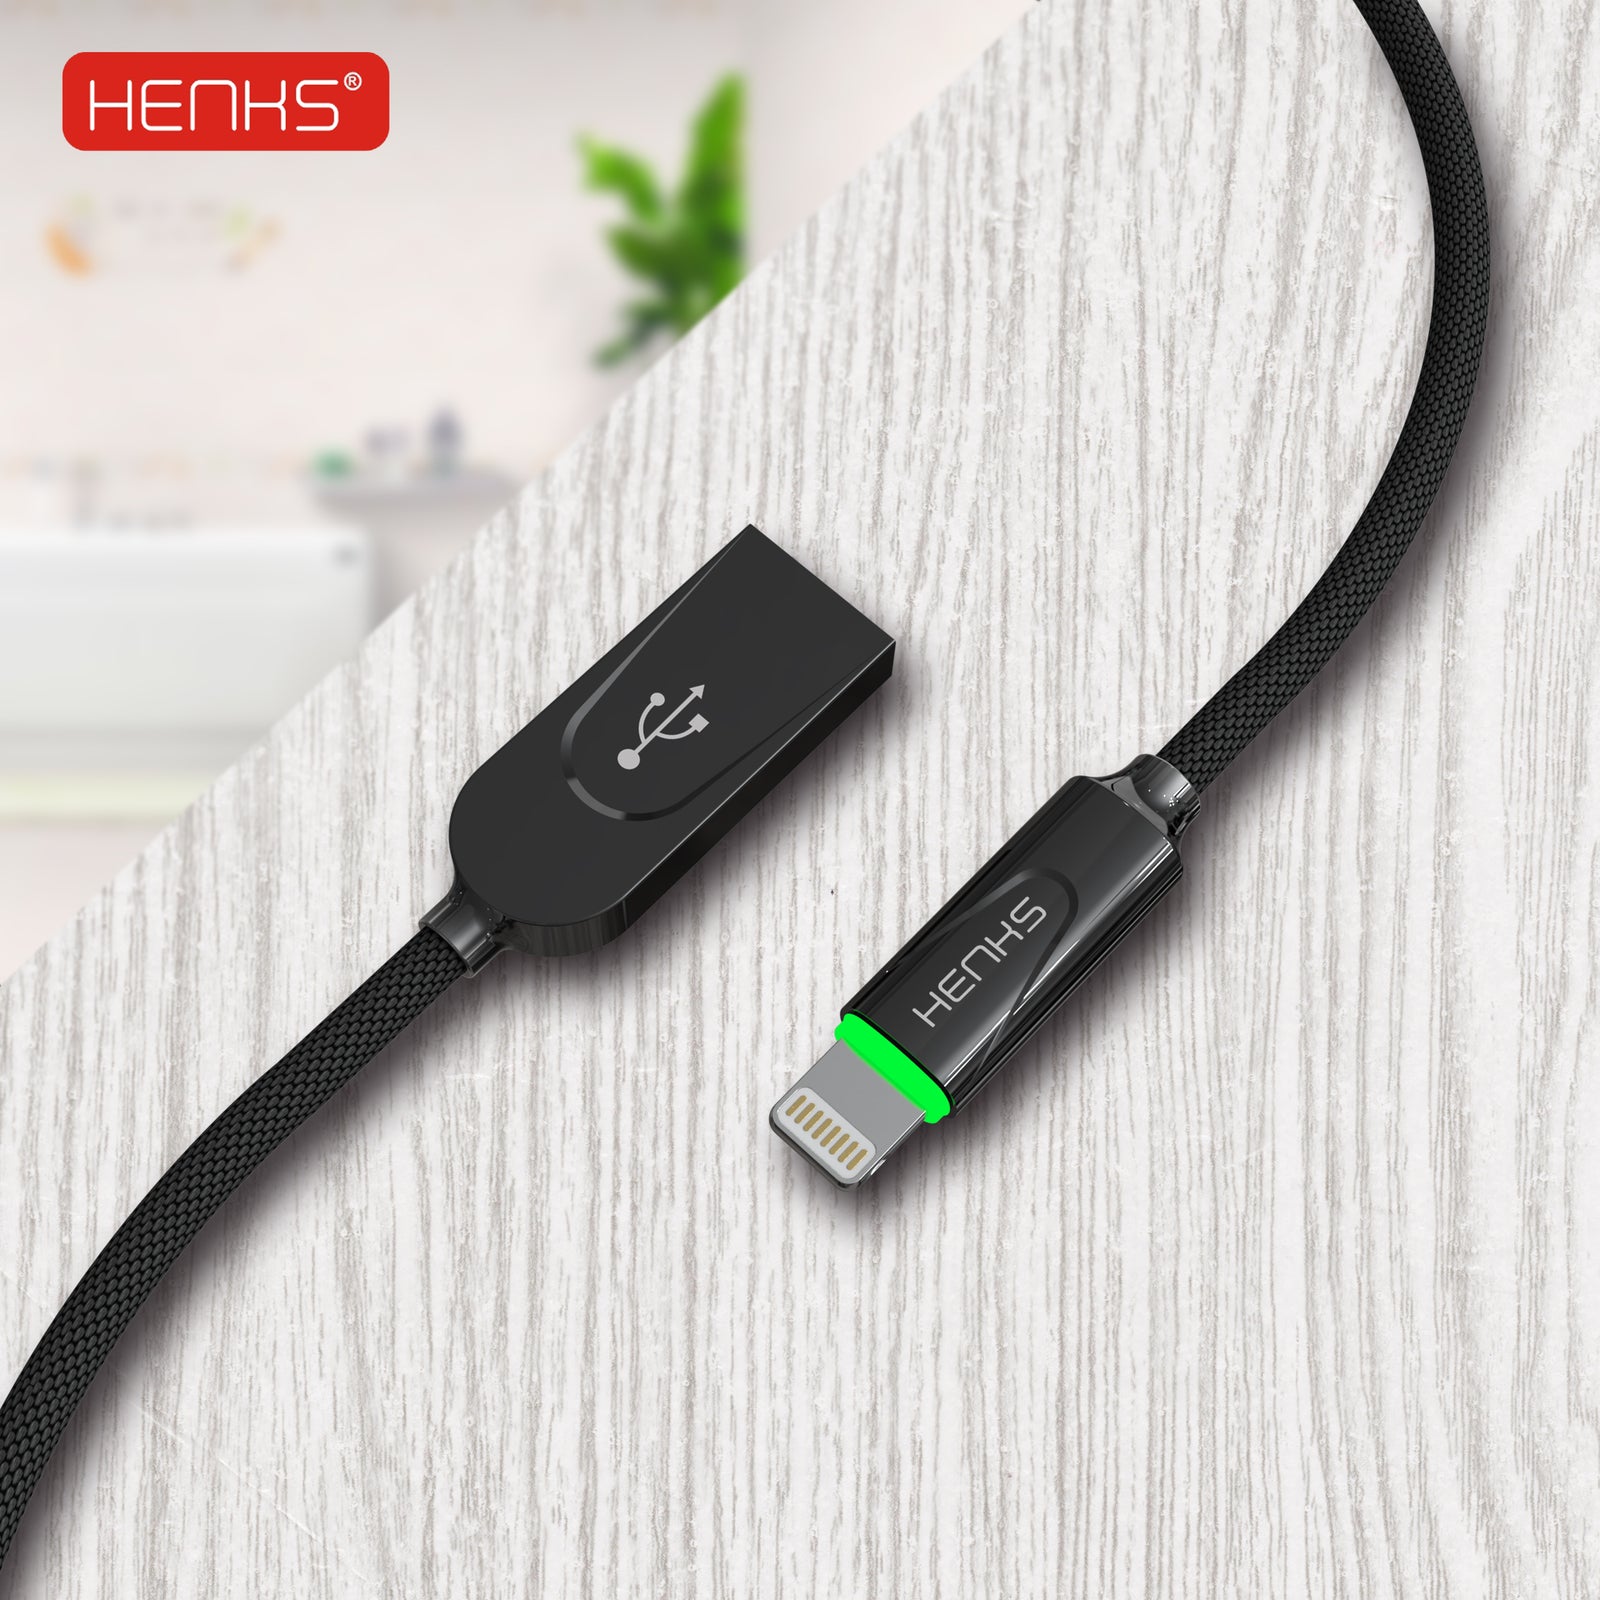 HENKS® Premium Connector Auto Disconnect Charging Cable for iPhone